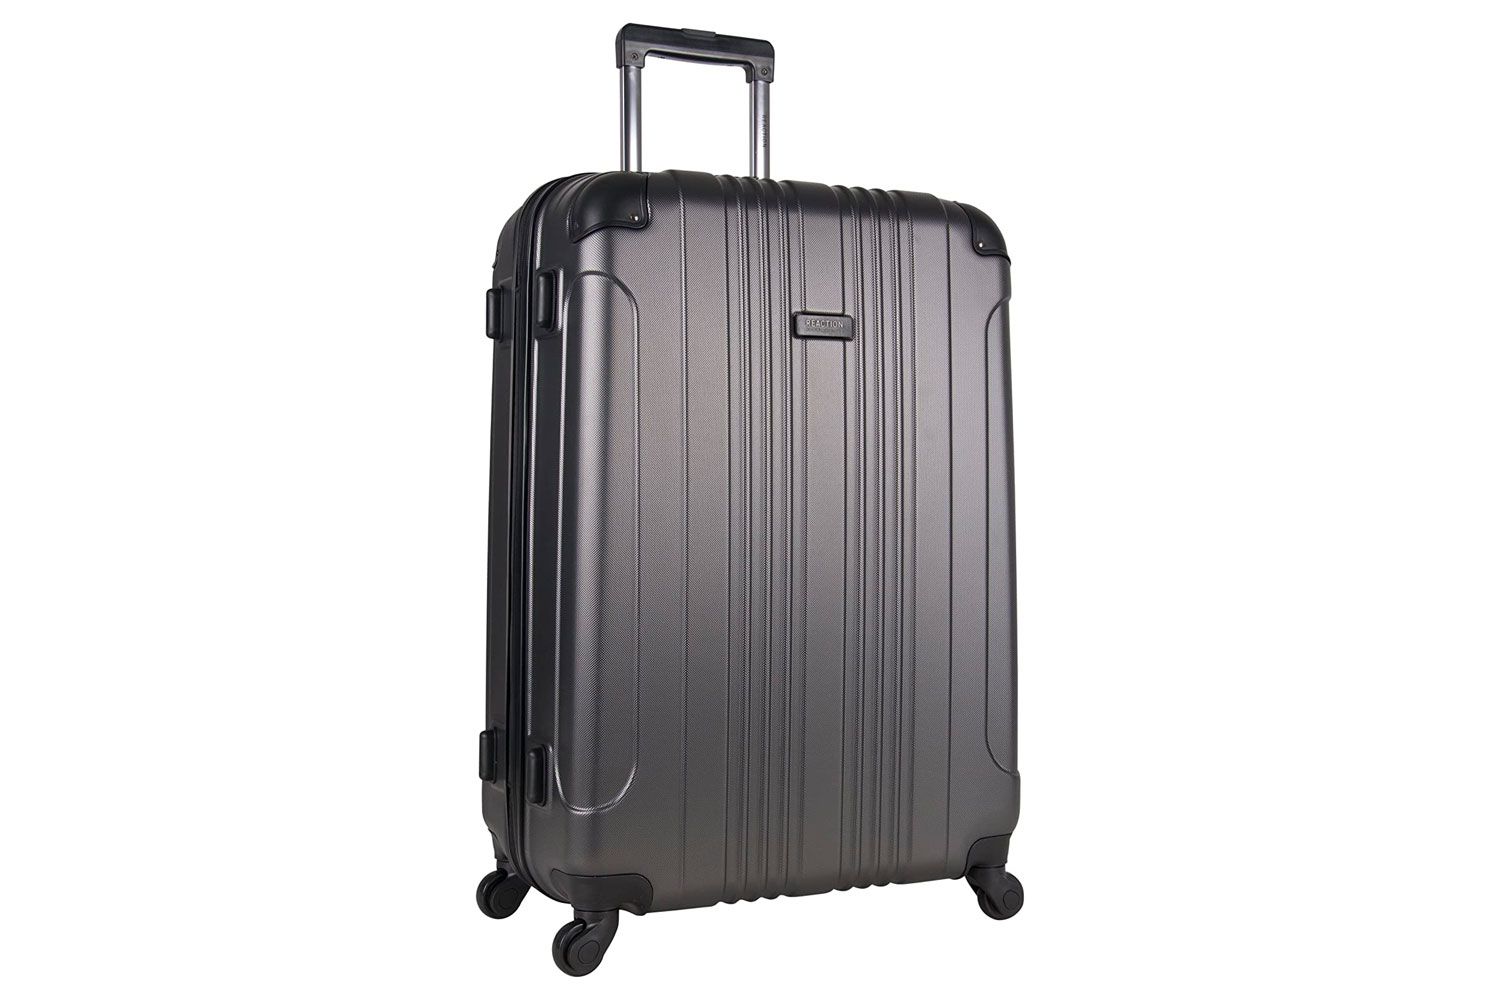 Kenneth Cole Reaction Out Of Bounds 28-Inch Hardside Suitcase